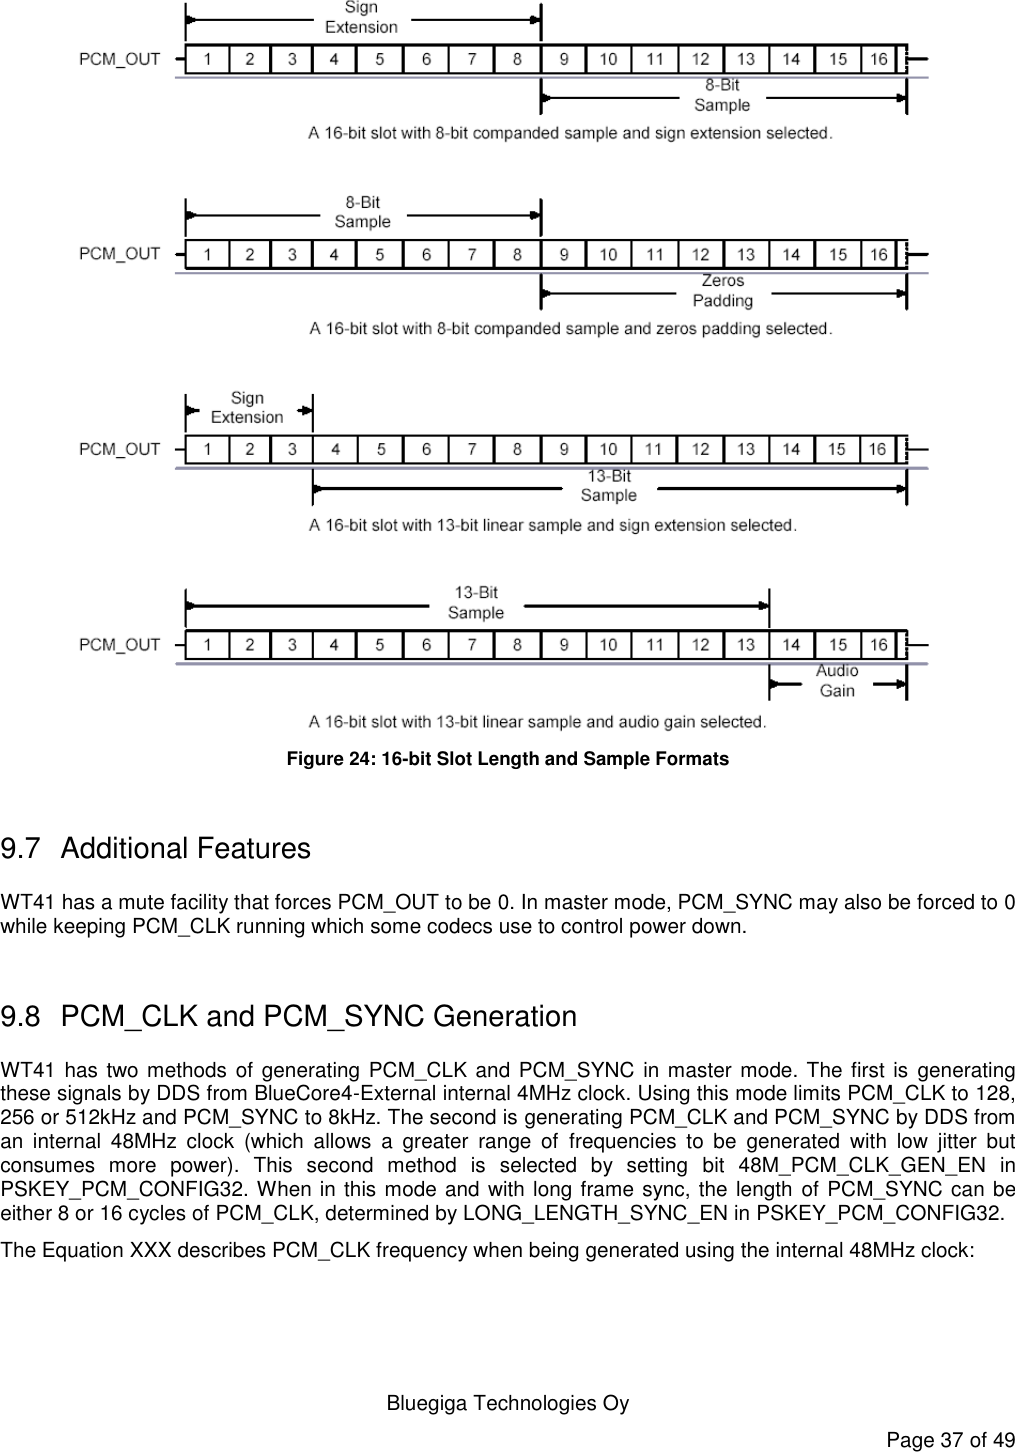   Bluegiga Technologies Oy Page 37 of 49  Figure 24: 16-bit Slot Length and Sample Formats  9.7  Additional Features WT41 has a mute facility that forces PCM_OUT to be 0. In master mode, PCM_SYNC may also be forced to 0 while keeping PCM_CLK running which some codecs use to control power down.  9.8  PCM_CLK and PCM_SYNC Generation WT41 has two methods of generating  PCM_CLK and PCM_SYNC  in master mode. The first is generating these signals by DDS from BlueCore4-External internal 4MHz clock. Using this mode limits PCM_CLK to 128, 256 or 512kHz and PCM_SYNC to 8kHz. The second is generating PCM_CLK and PCM_SYNC by DDS from an  internal  48MHz  clock  (which  allows  a  greater  range  of  frequencies  to  be  generated  with  low  jitter  but consumes  more  power).  This  second  method  is  selected  by  setting  bit  48M_PCM_CLK_GEN_EN  in PSKEY_PCM_CONFIG32. When in this mode and with long frame sync, the length of PCM_SYNC can be either 8 or 16 cycles of PCM_CLK, determined by LONG_LENGTH_SYNC_EN in PSKEY_PCM_CONFIG32. The Equation XXX describes PCM_CLK frequency when being generated using the internal 48MHz clock:  